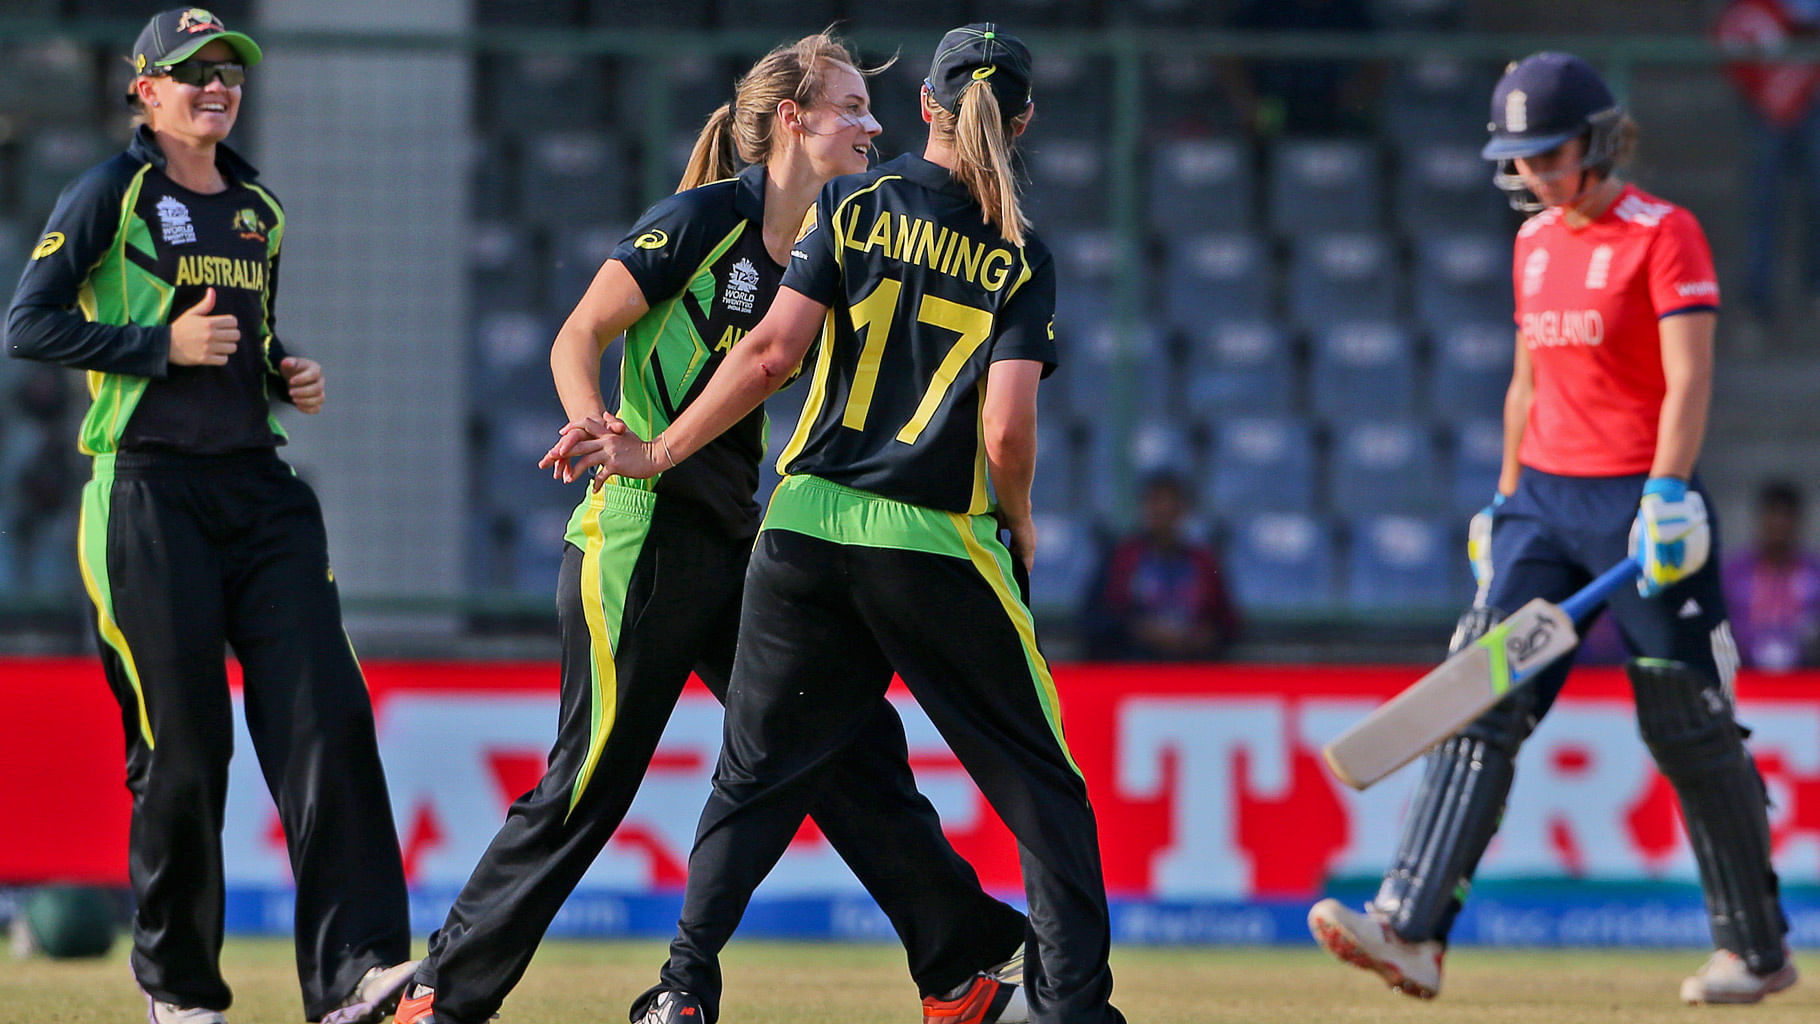 Australia celebrates after beating England in the semi-finals. (Photo: AP)